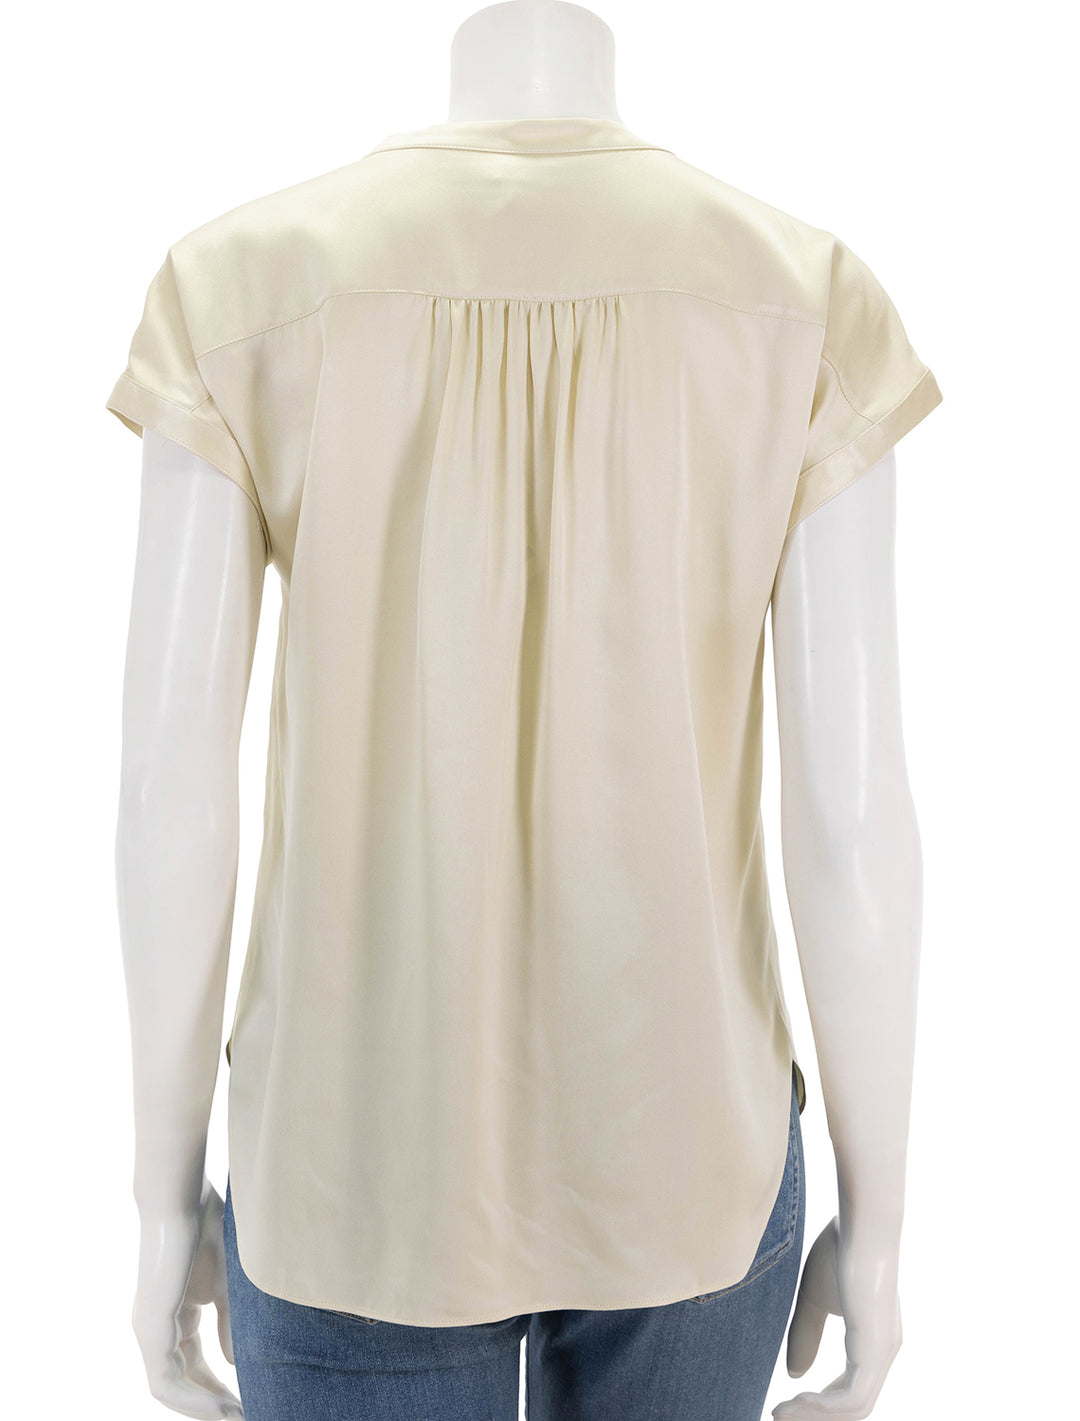 Back view of Faherty's sandwashed silk desmond top in pearled ivory.